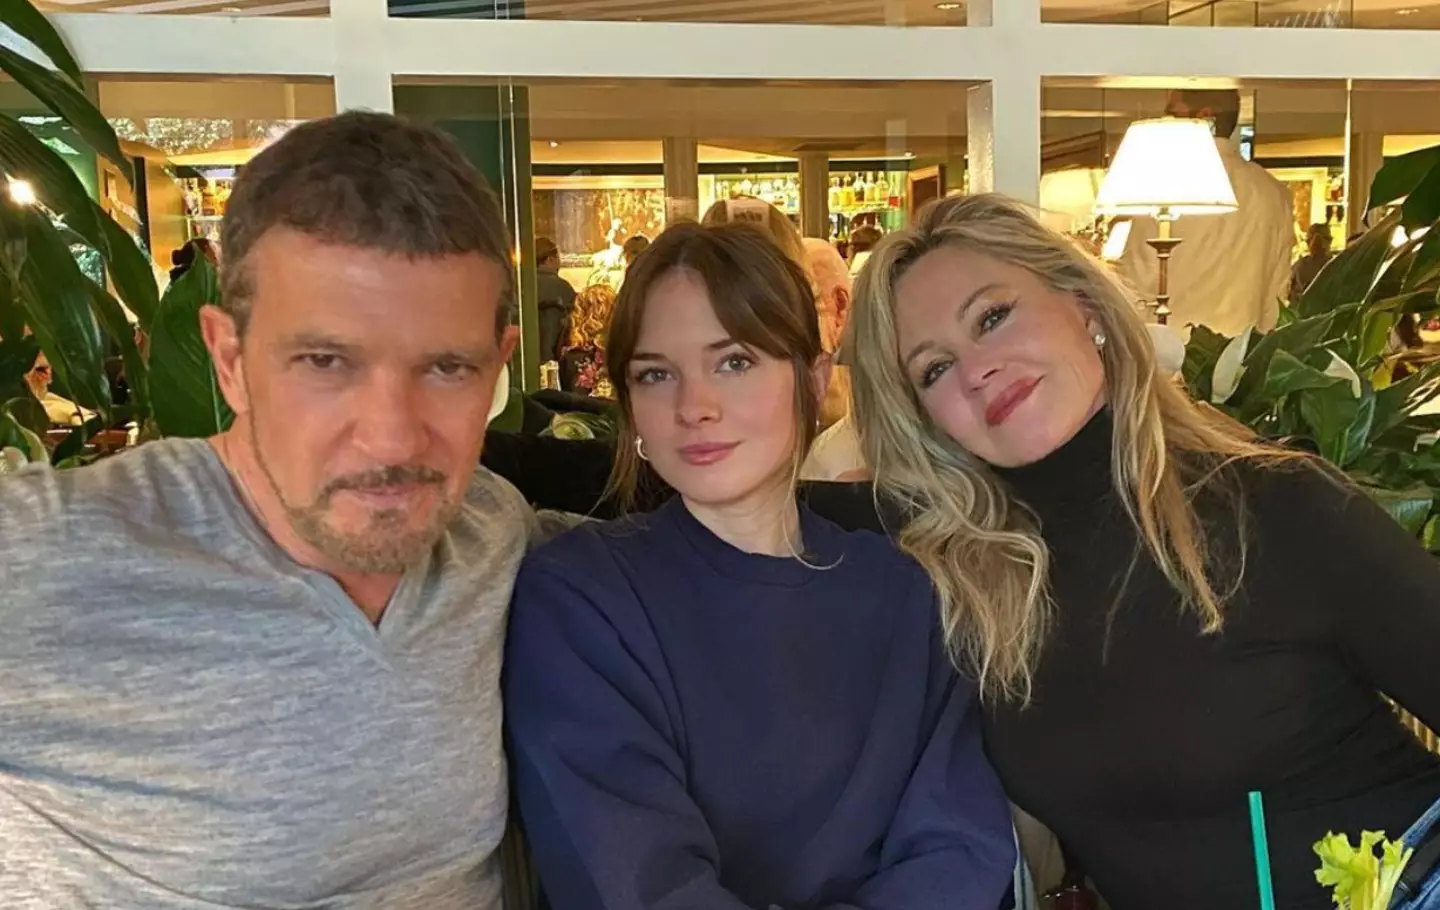 Antonio Banderas and Melanie Griffith with their daughter Stella.